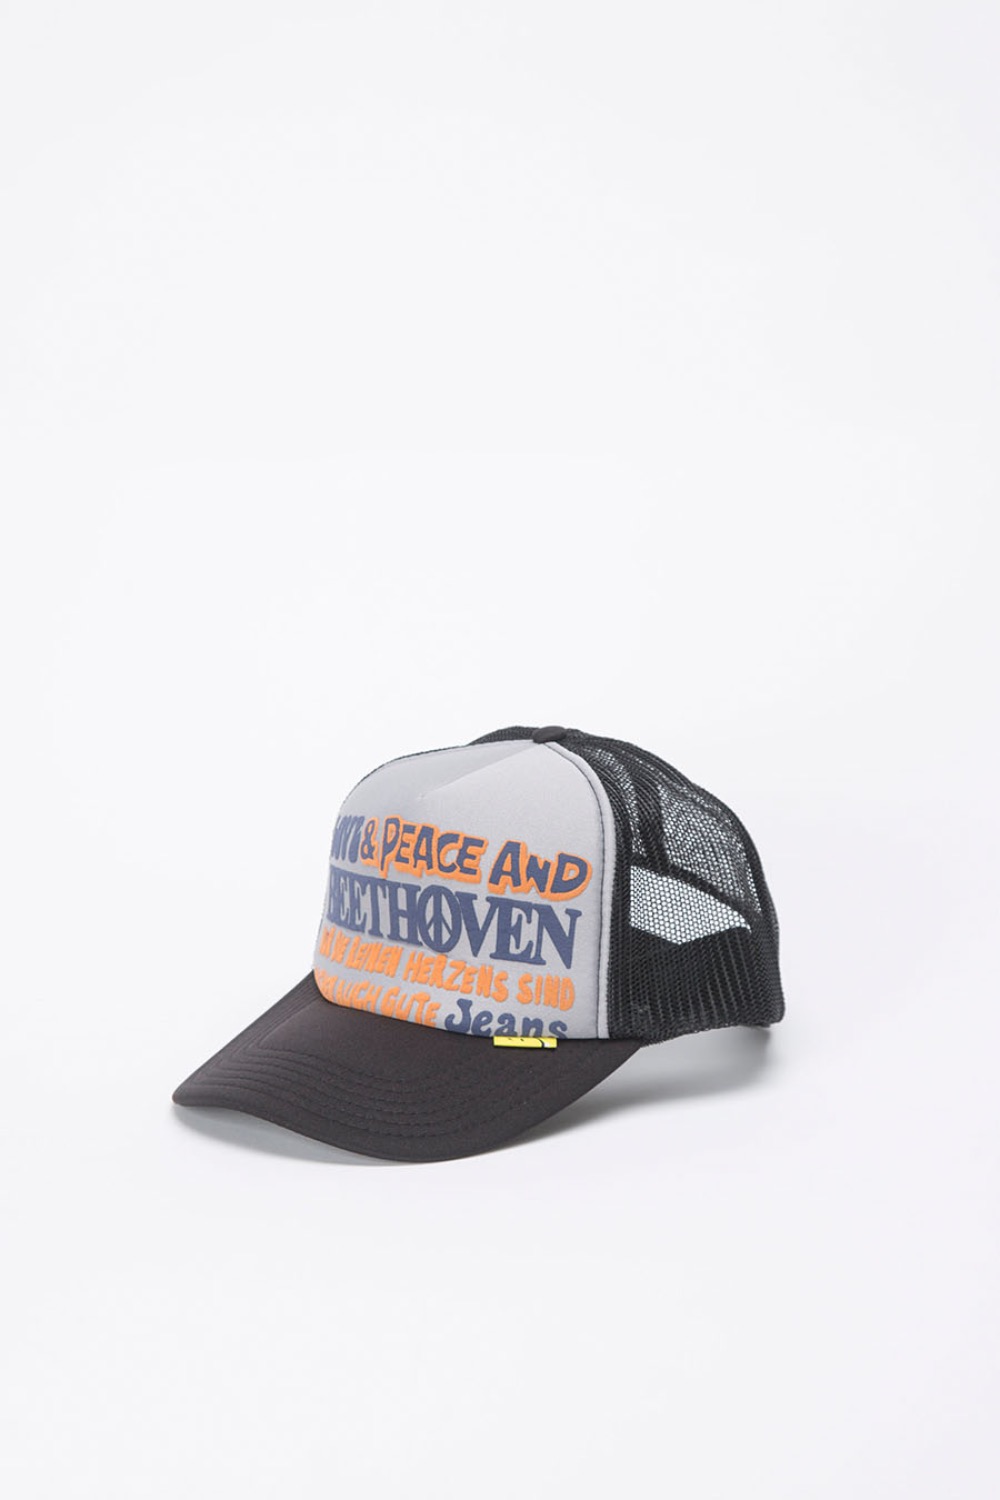 (23FW) LOVE&amp;PEACE AND BEETHOVEN TRUCK CAP GREY/BLACK